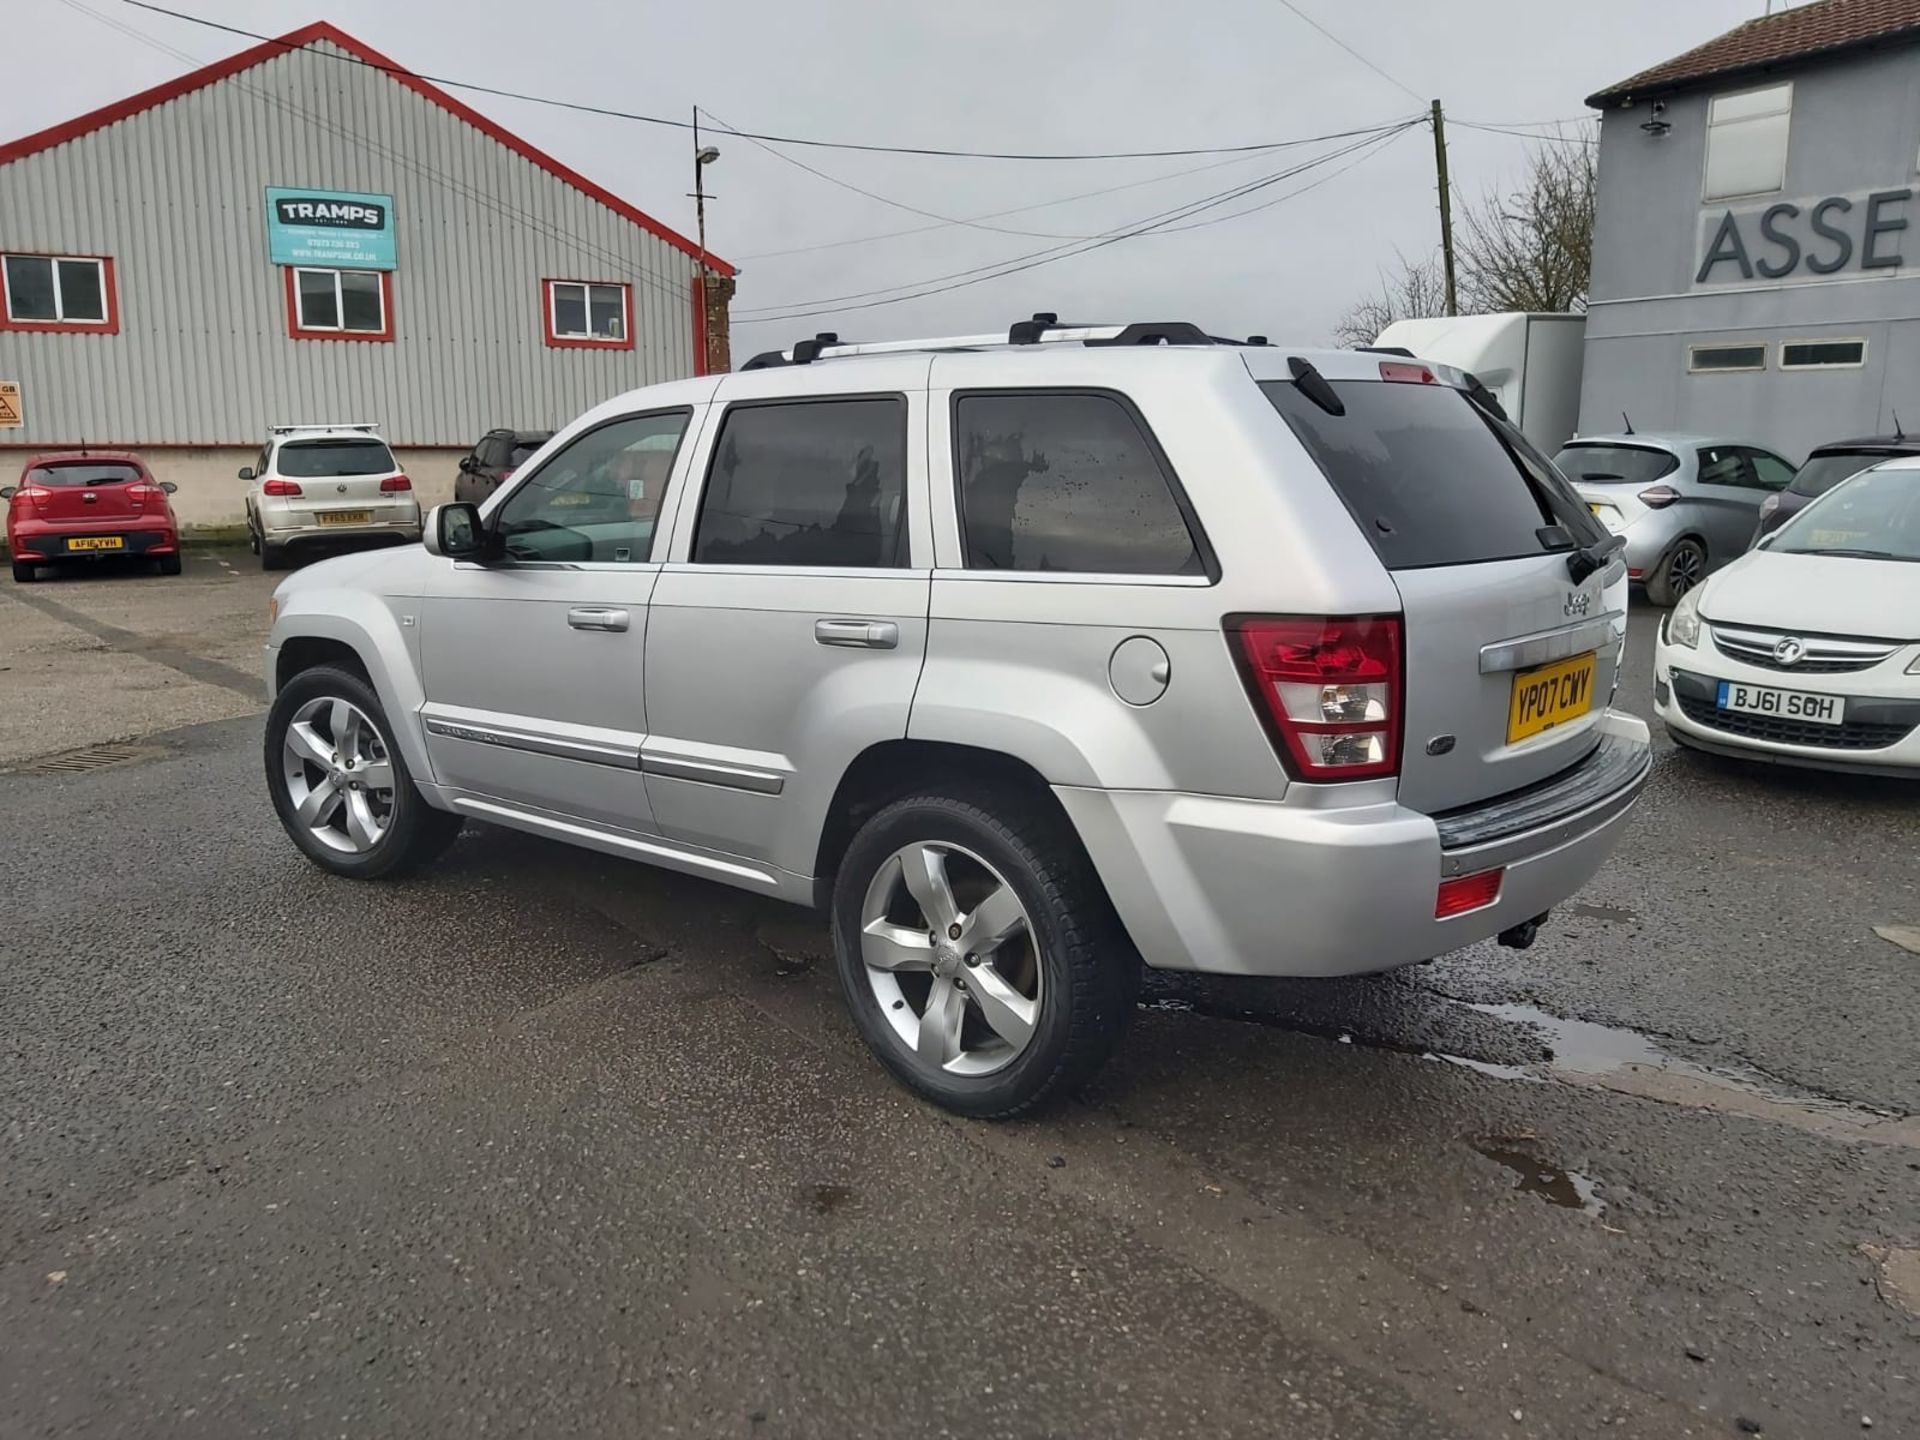 2007 JEEP G-CHEROKEE OVERLAND CRD A SILVER SUV ESTATE *NO VAT* - Image 5 of 17